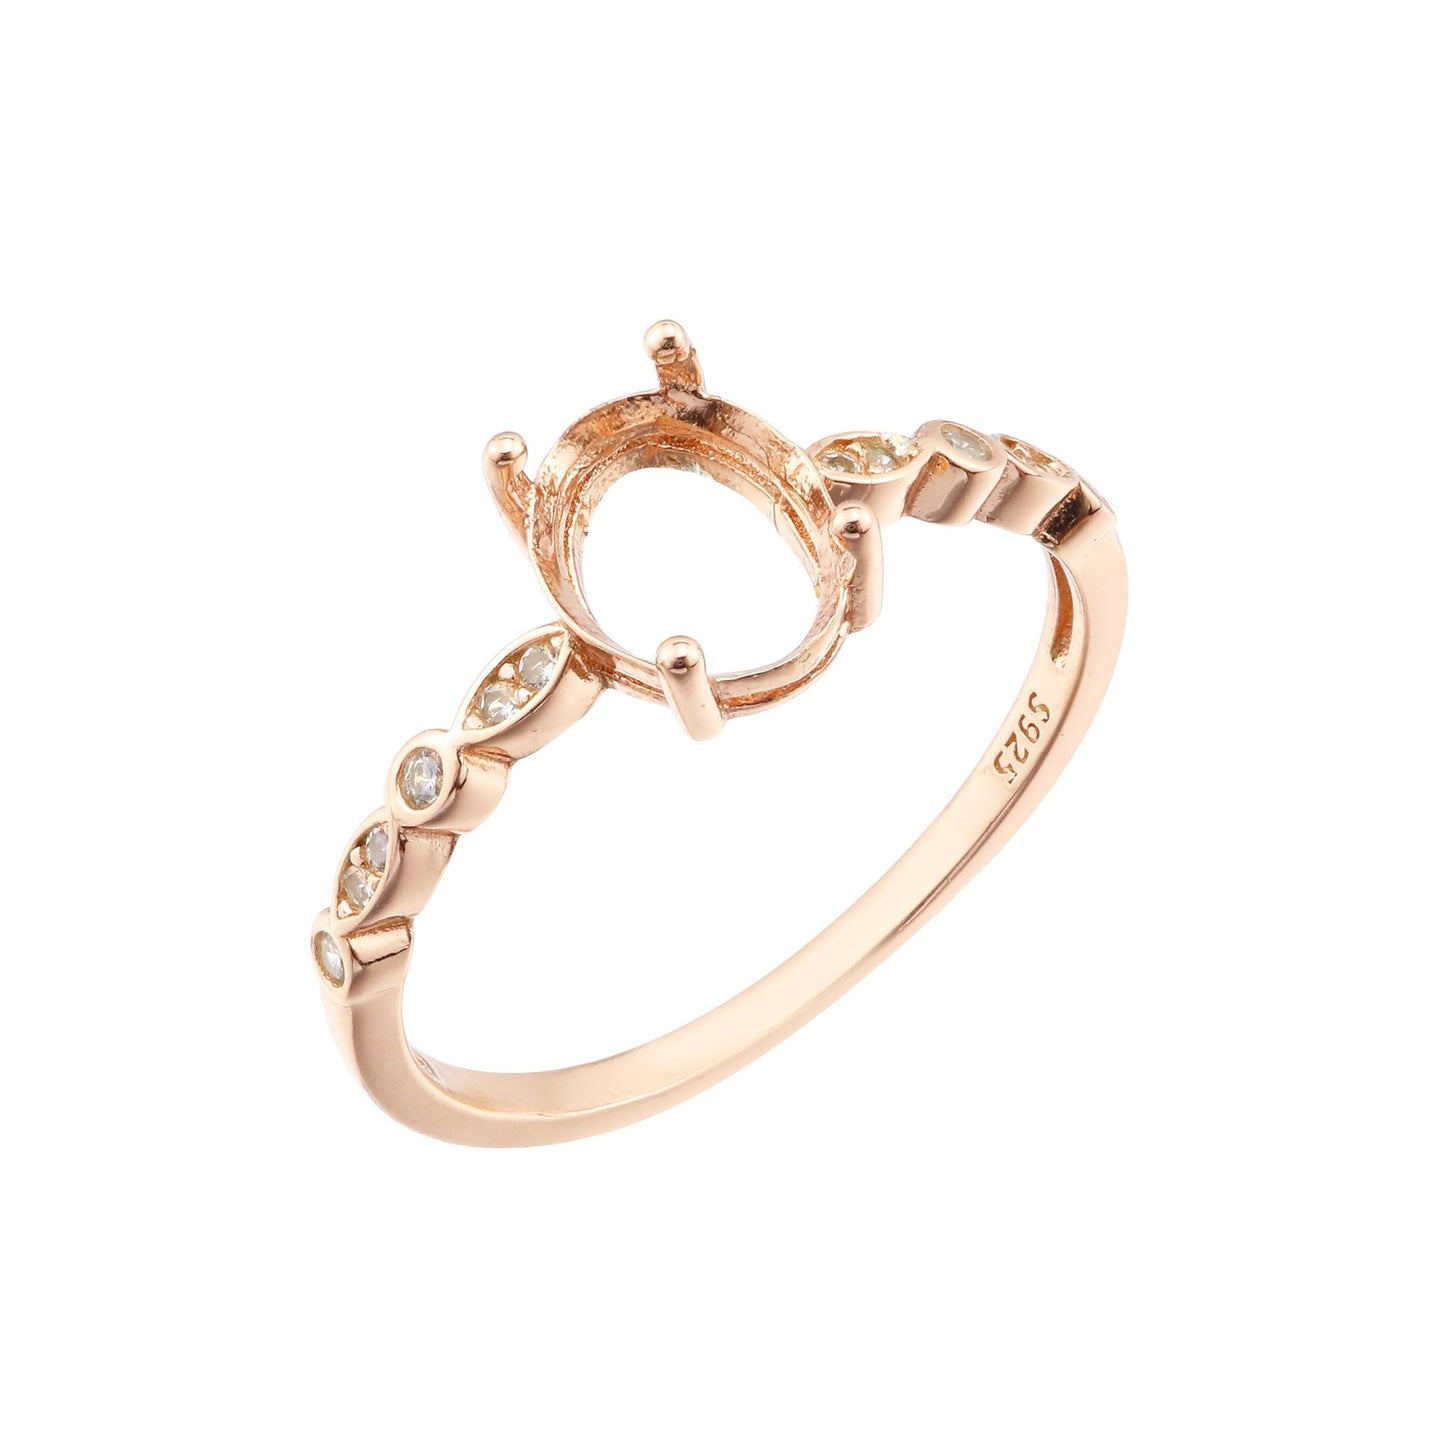 A rose gold oval art deco vintage setting with alternating bezel marquise and round gems on the sides.